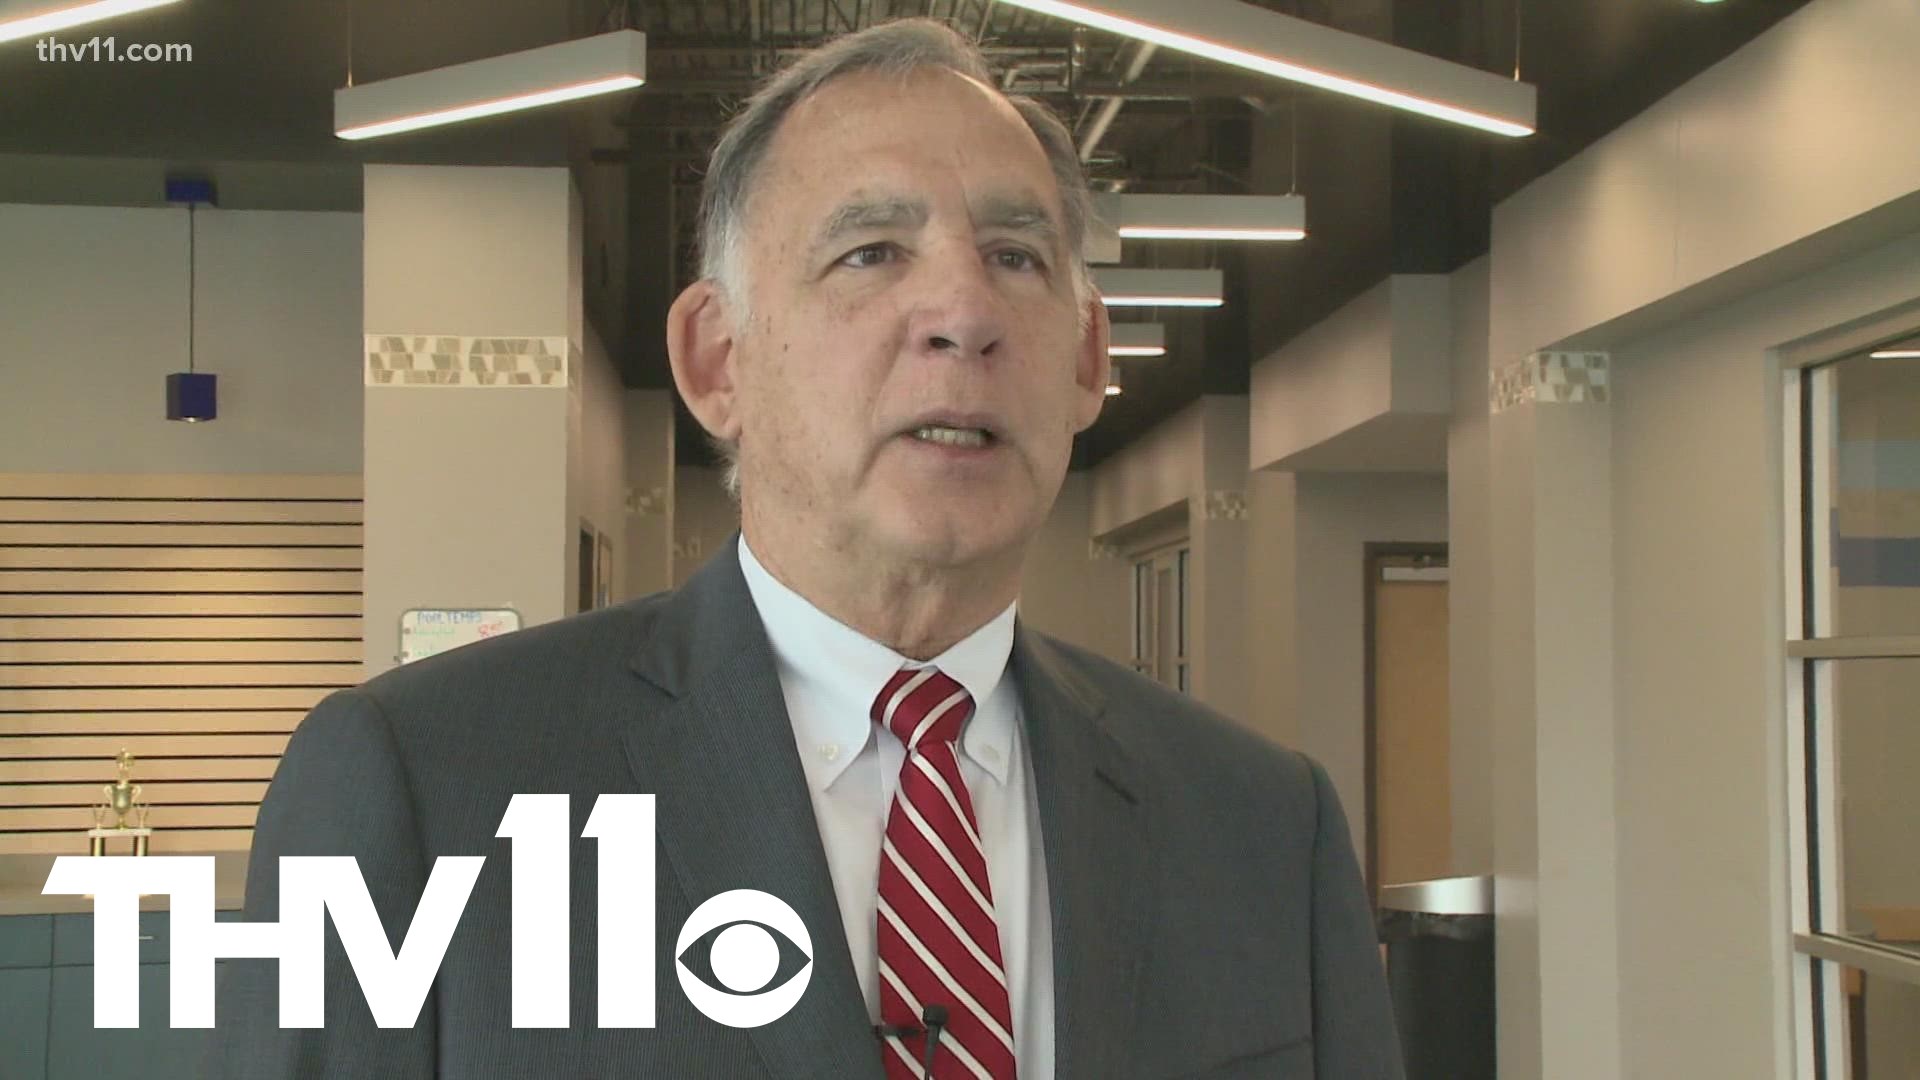 Arkansas State Senator John Boozman visited Pine Bluff on Thursday to learn about 'Go Forward Pine Bluff' and the progress that has been made.